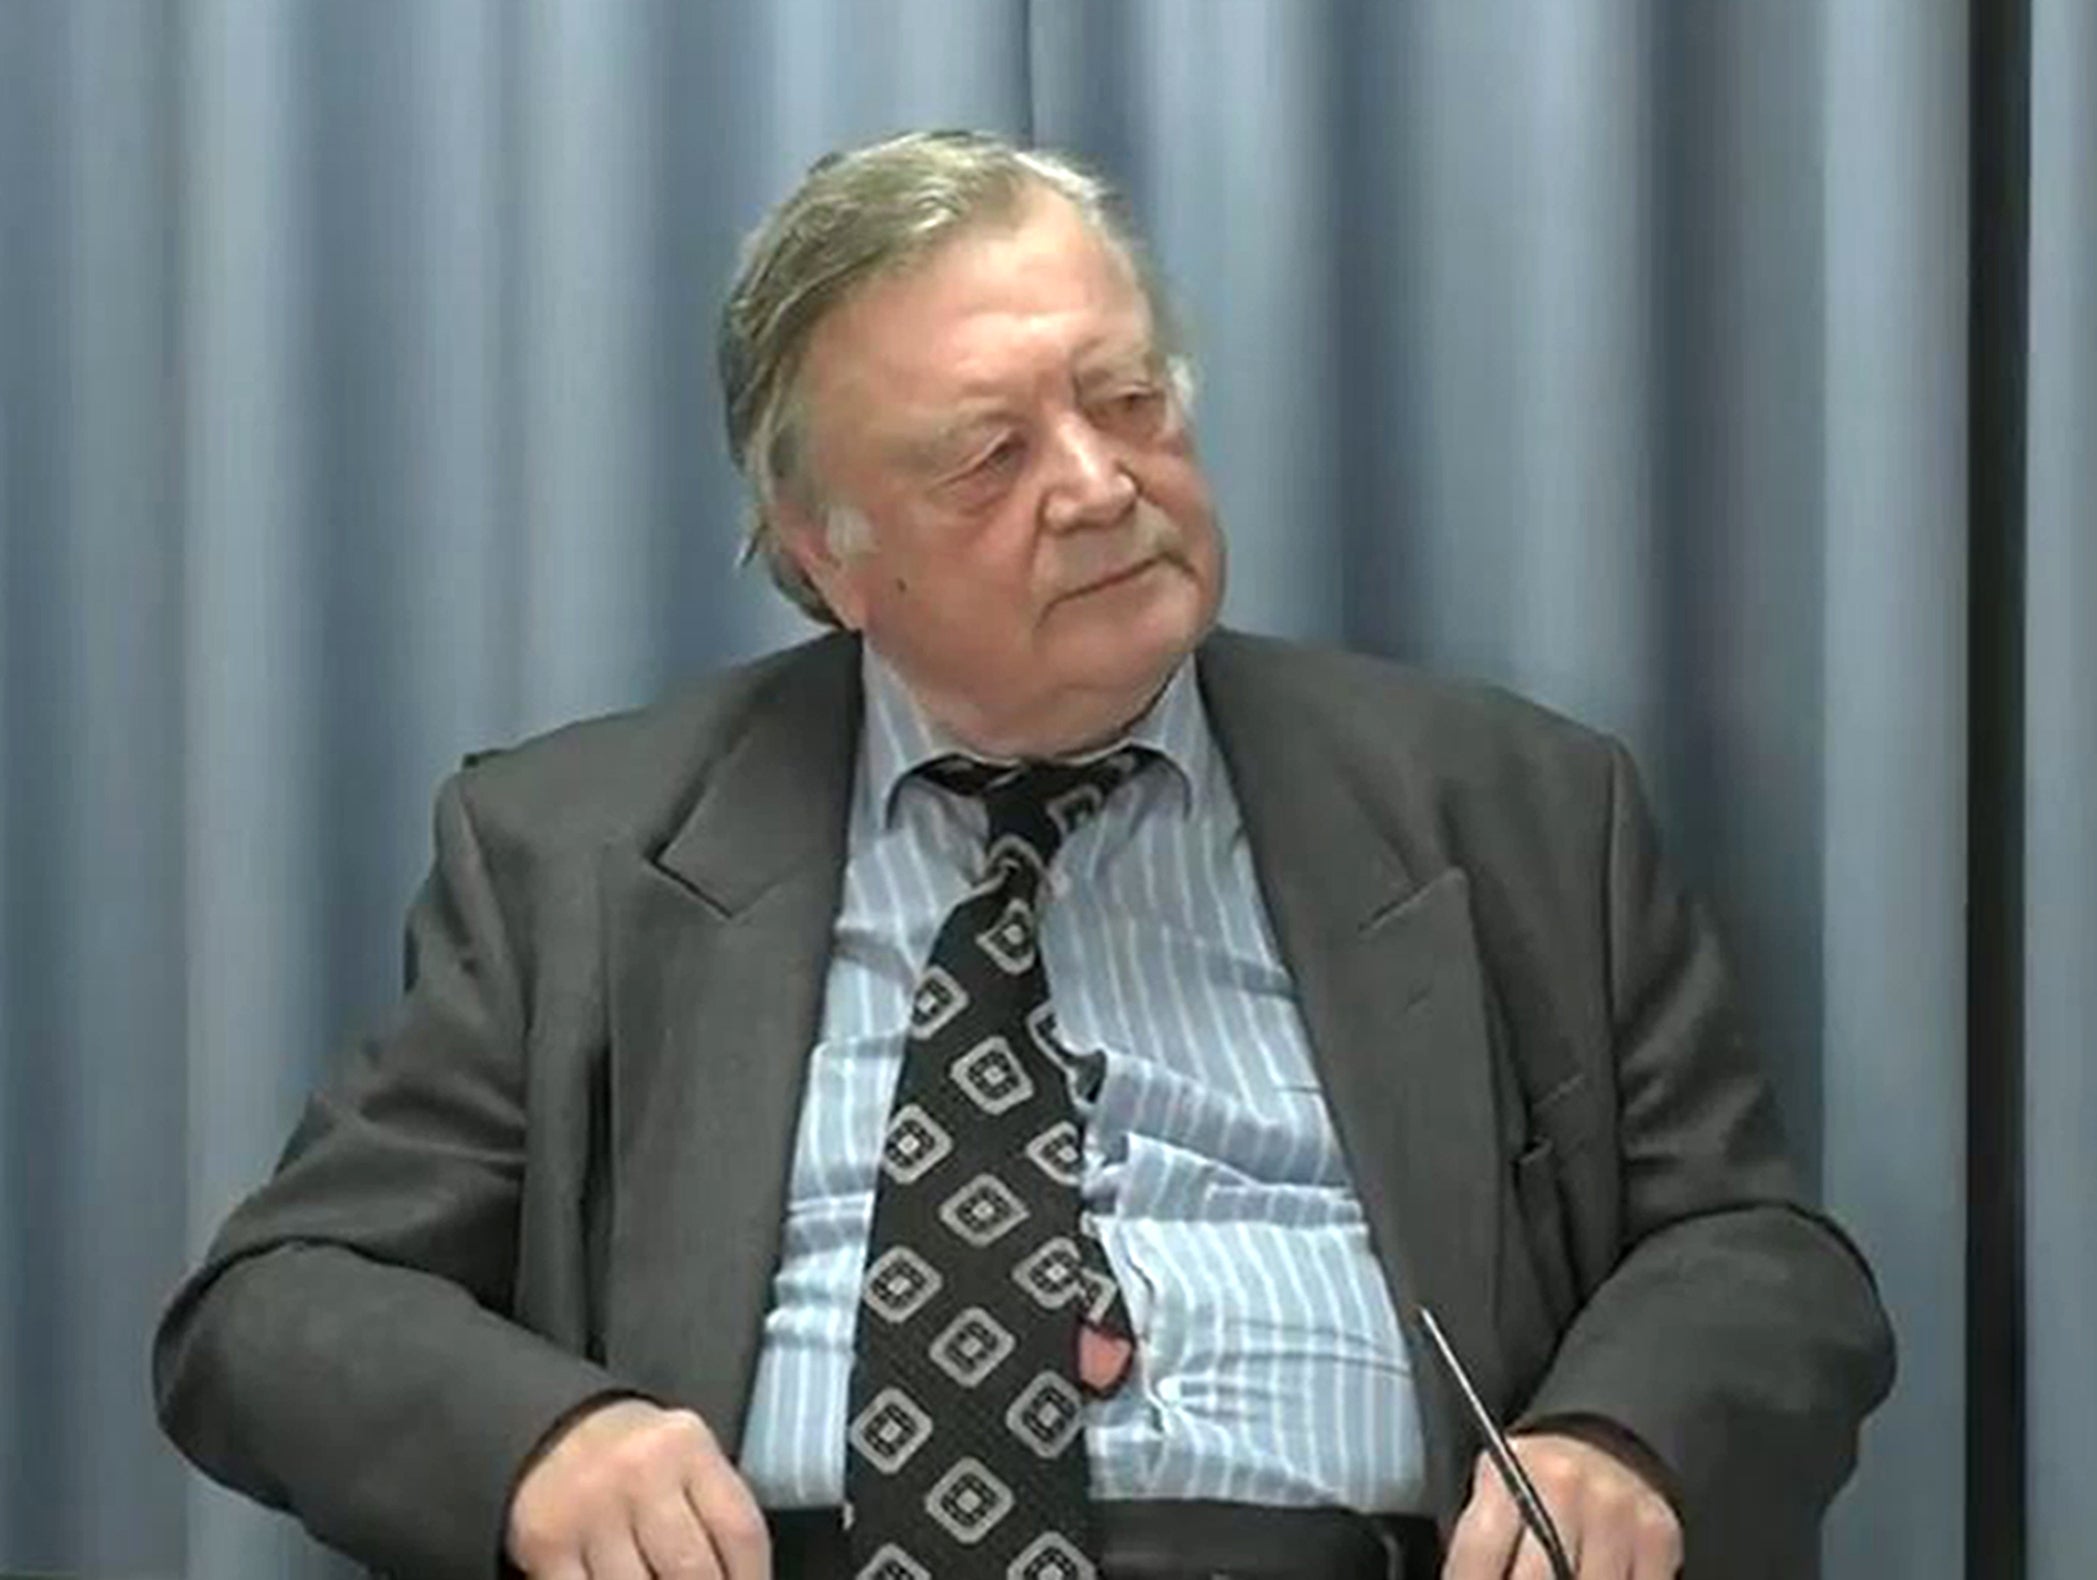 Lord Ken Clarke has been giving evidence at the Infected Blood Inquiry this week